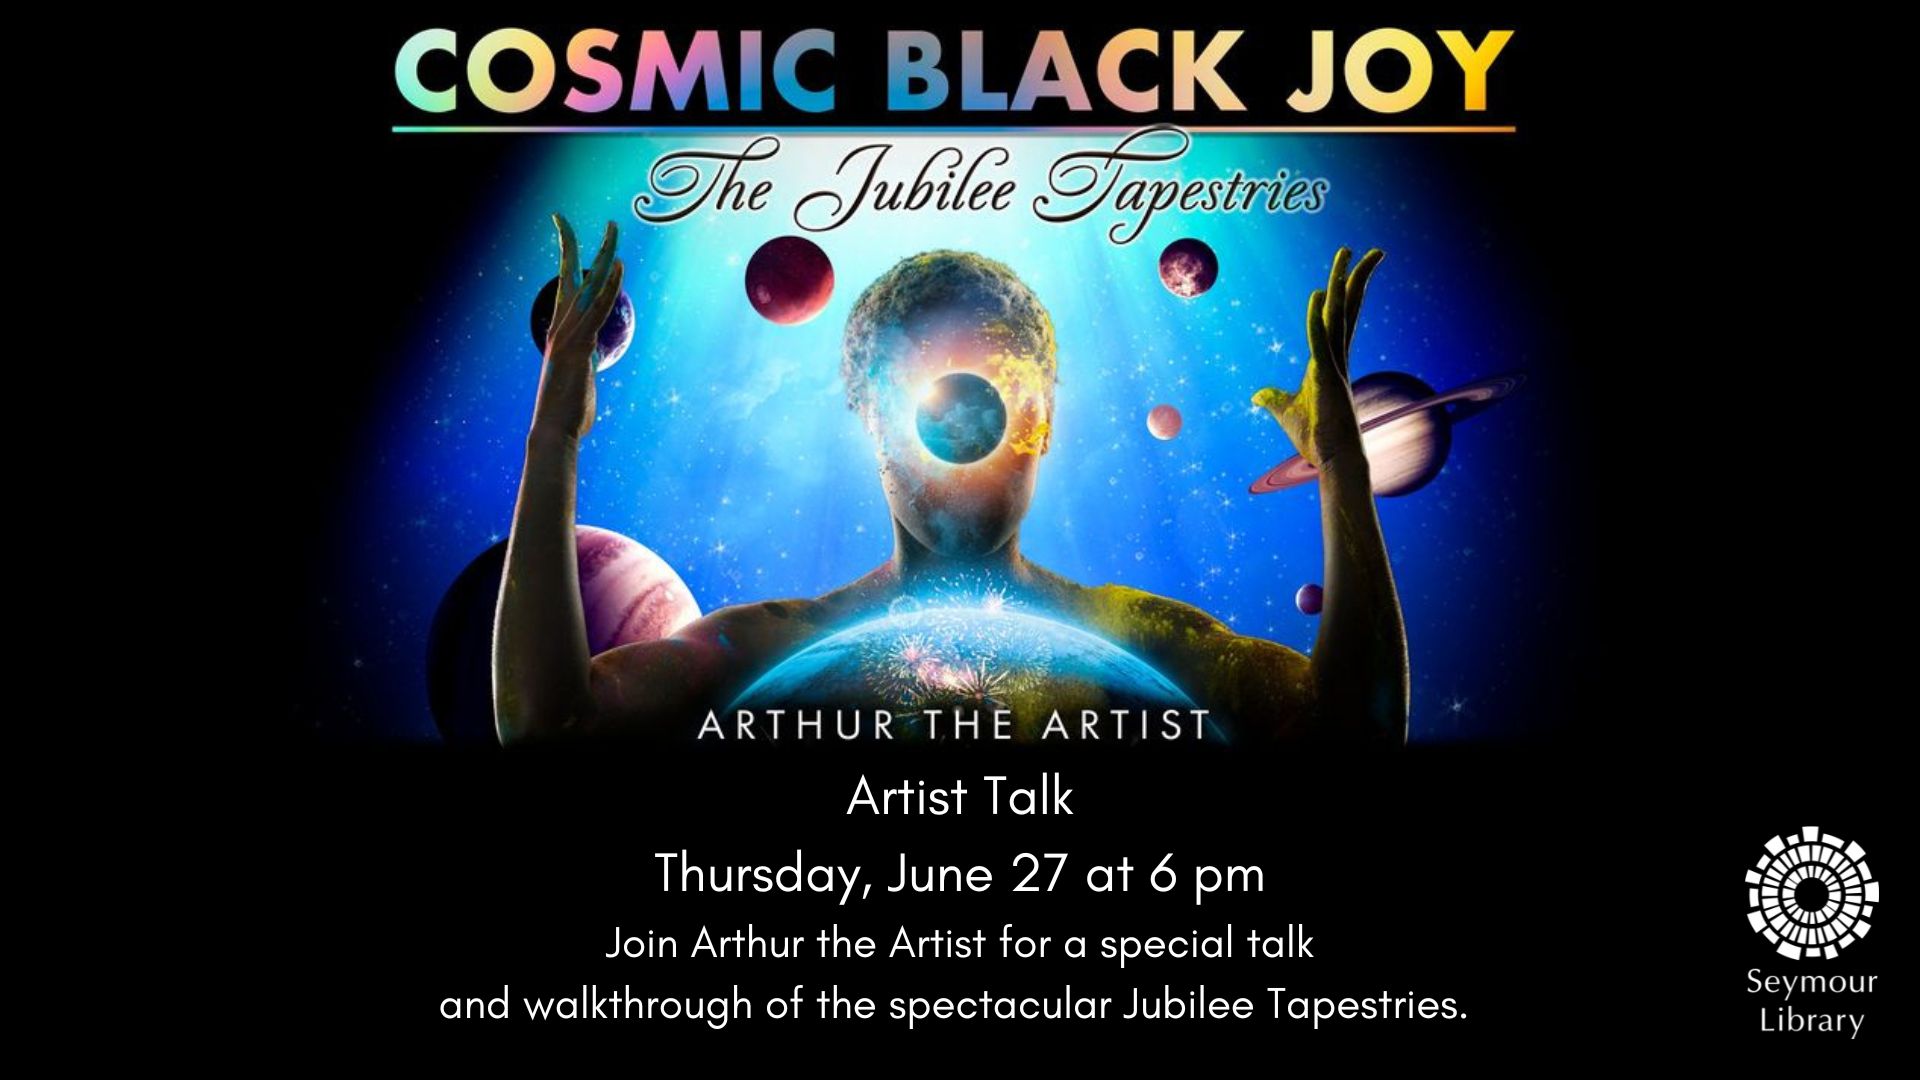 Arthur the Artist - Cosmic Black Joy - Artist Talk with image of man with plants and and the planet earth in the foreground.